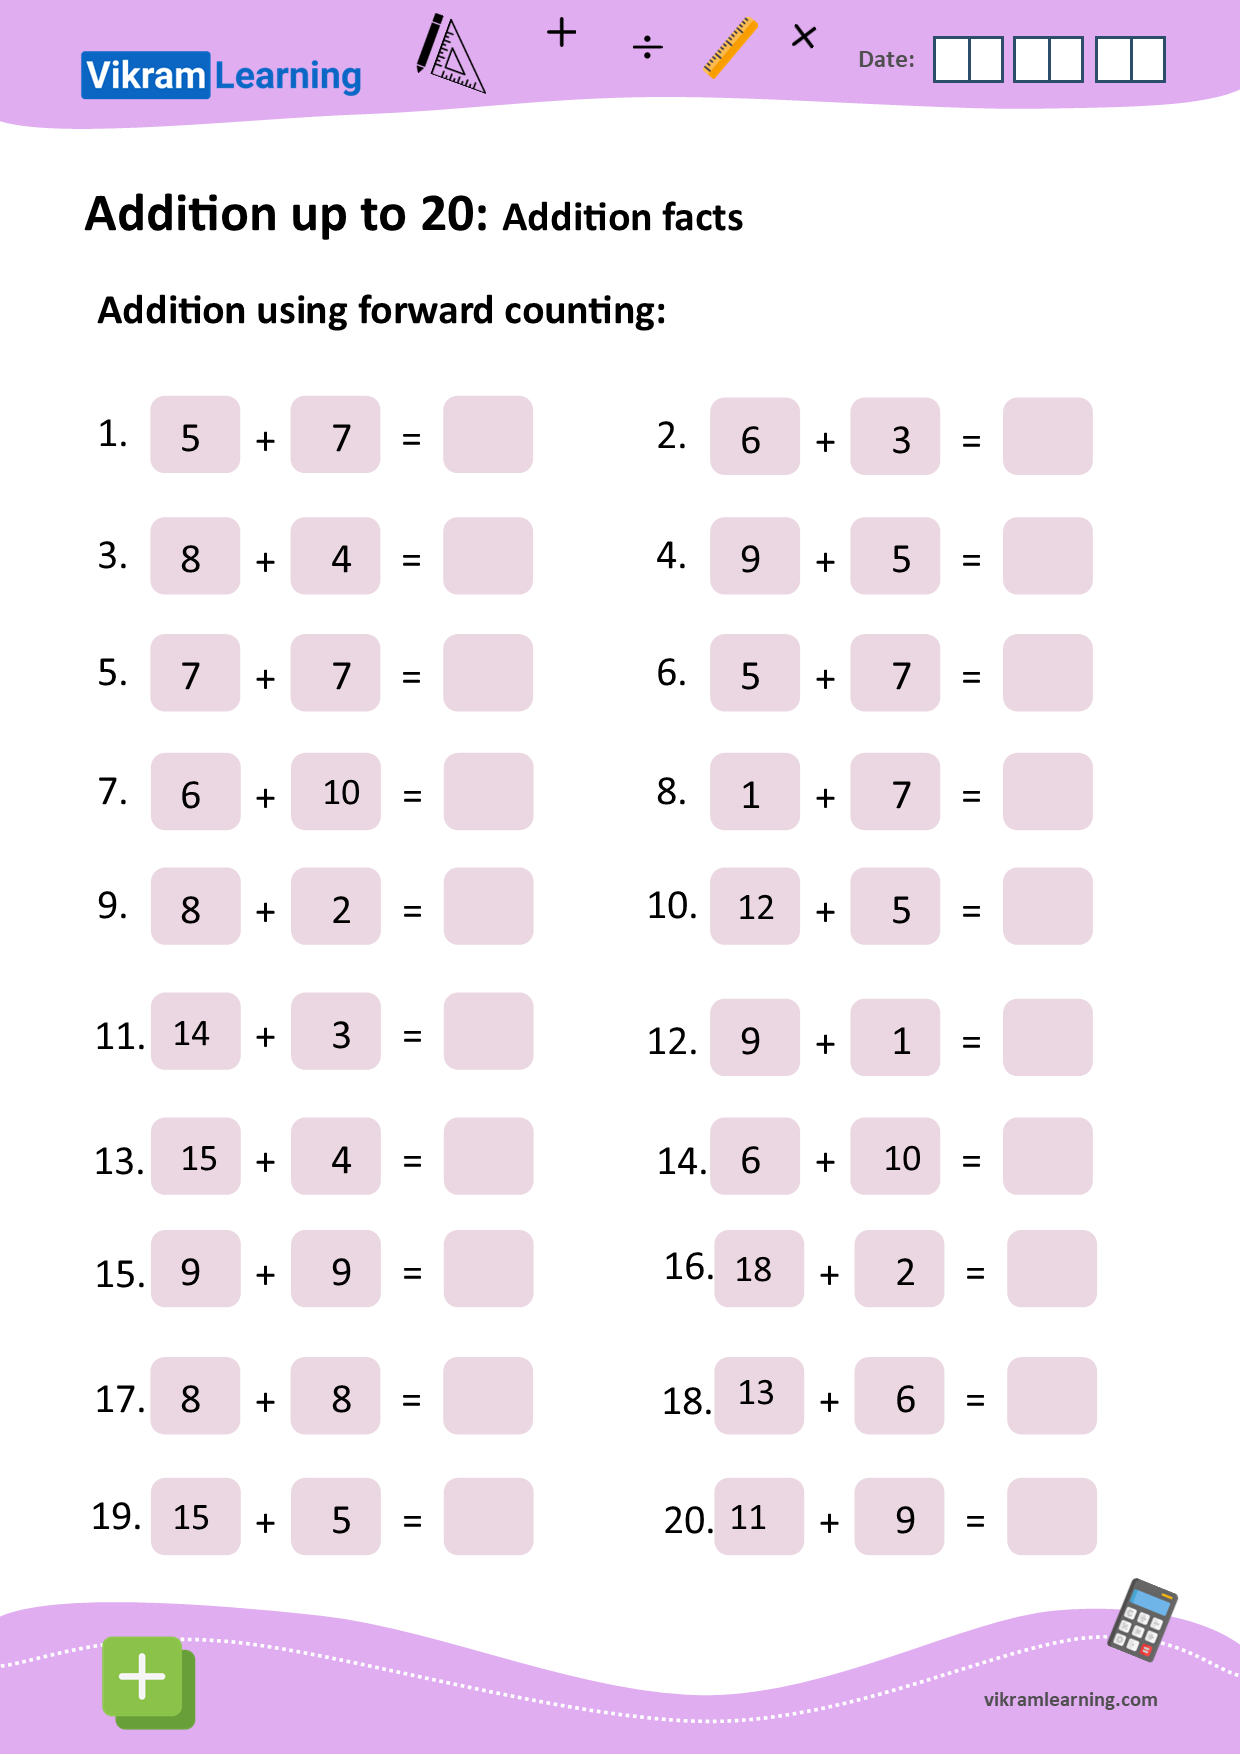 Download addition up to 20 using forward counting worksheets